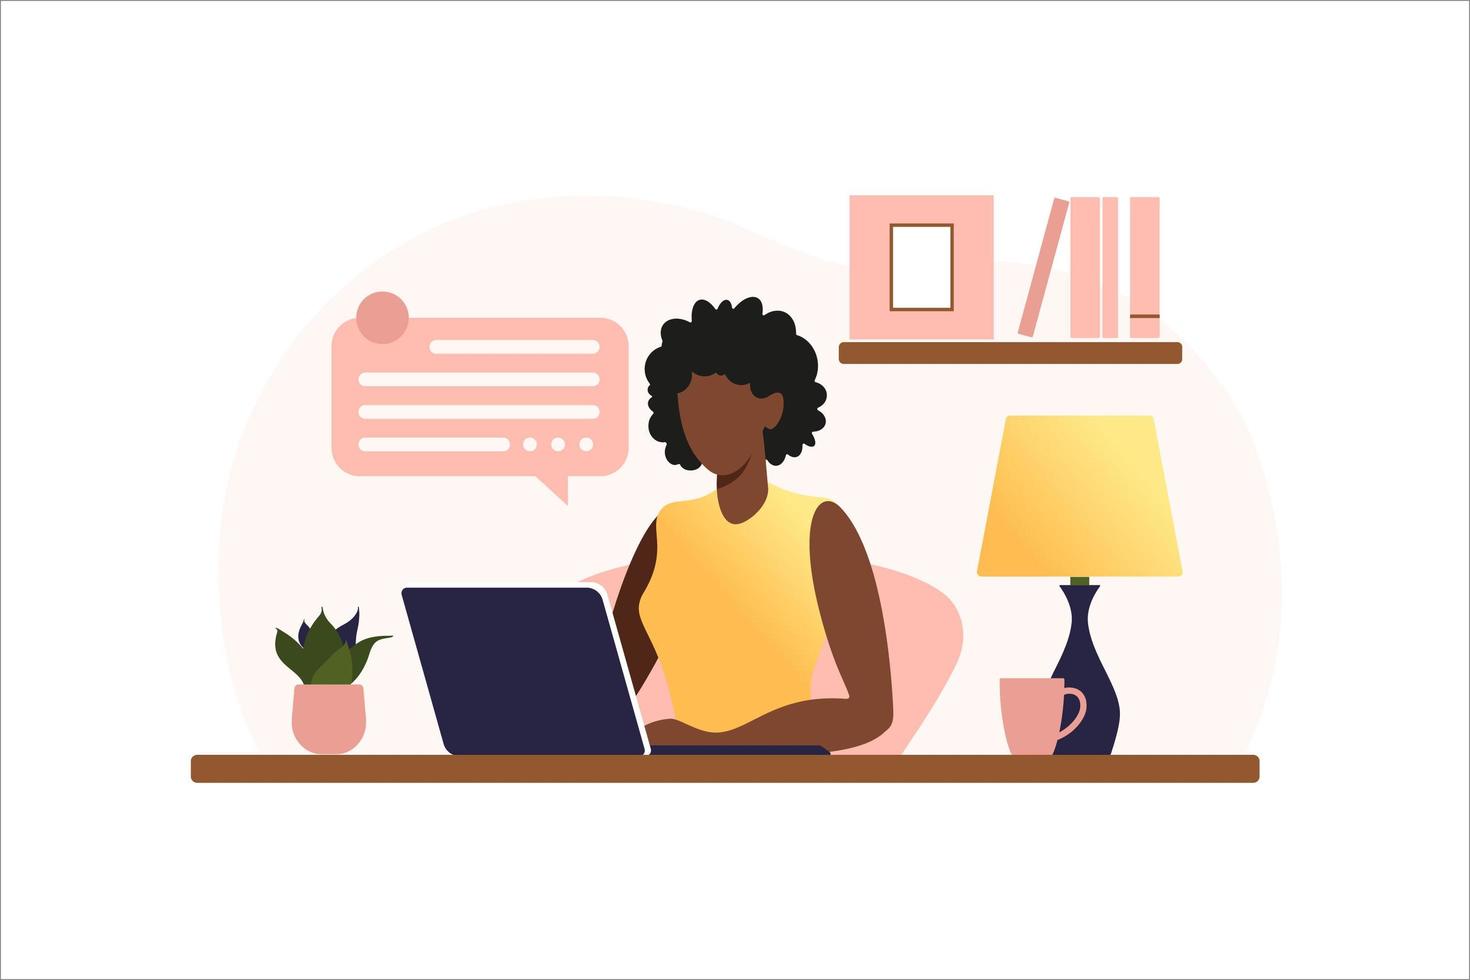 African american woman sitting at the table with laptop. Working on a computer. Freelance, online education or social media concept. Working from home, remote job. Flat style. Vector illustration.